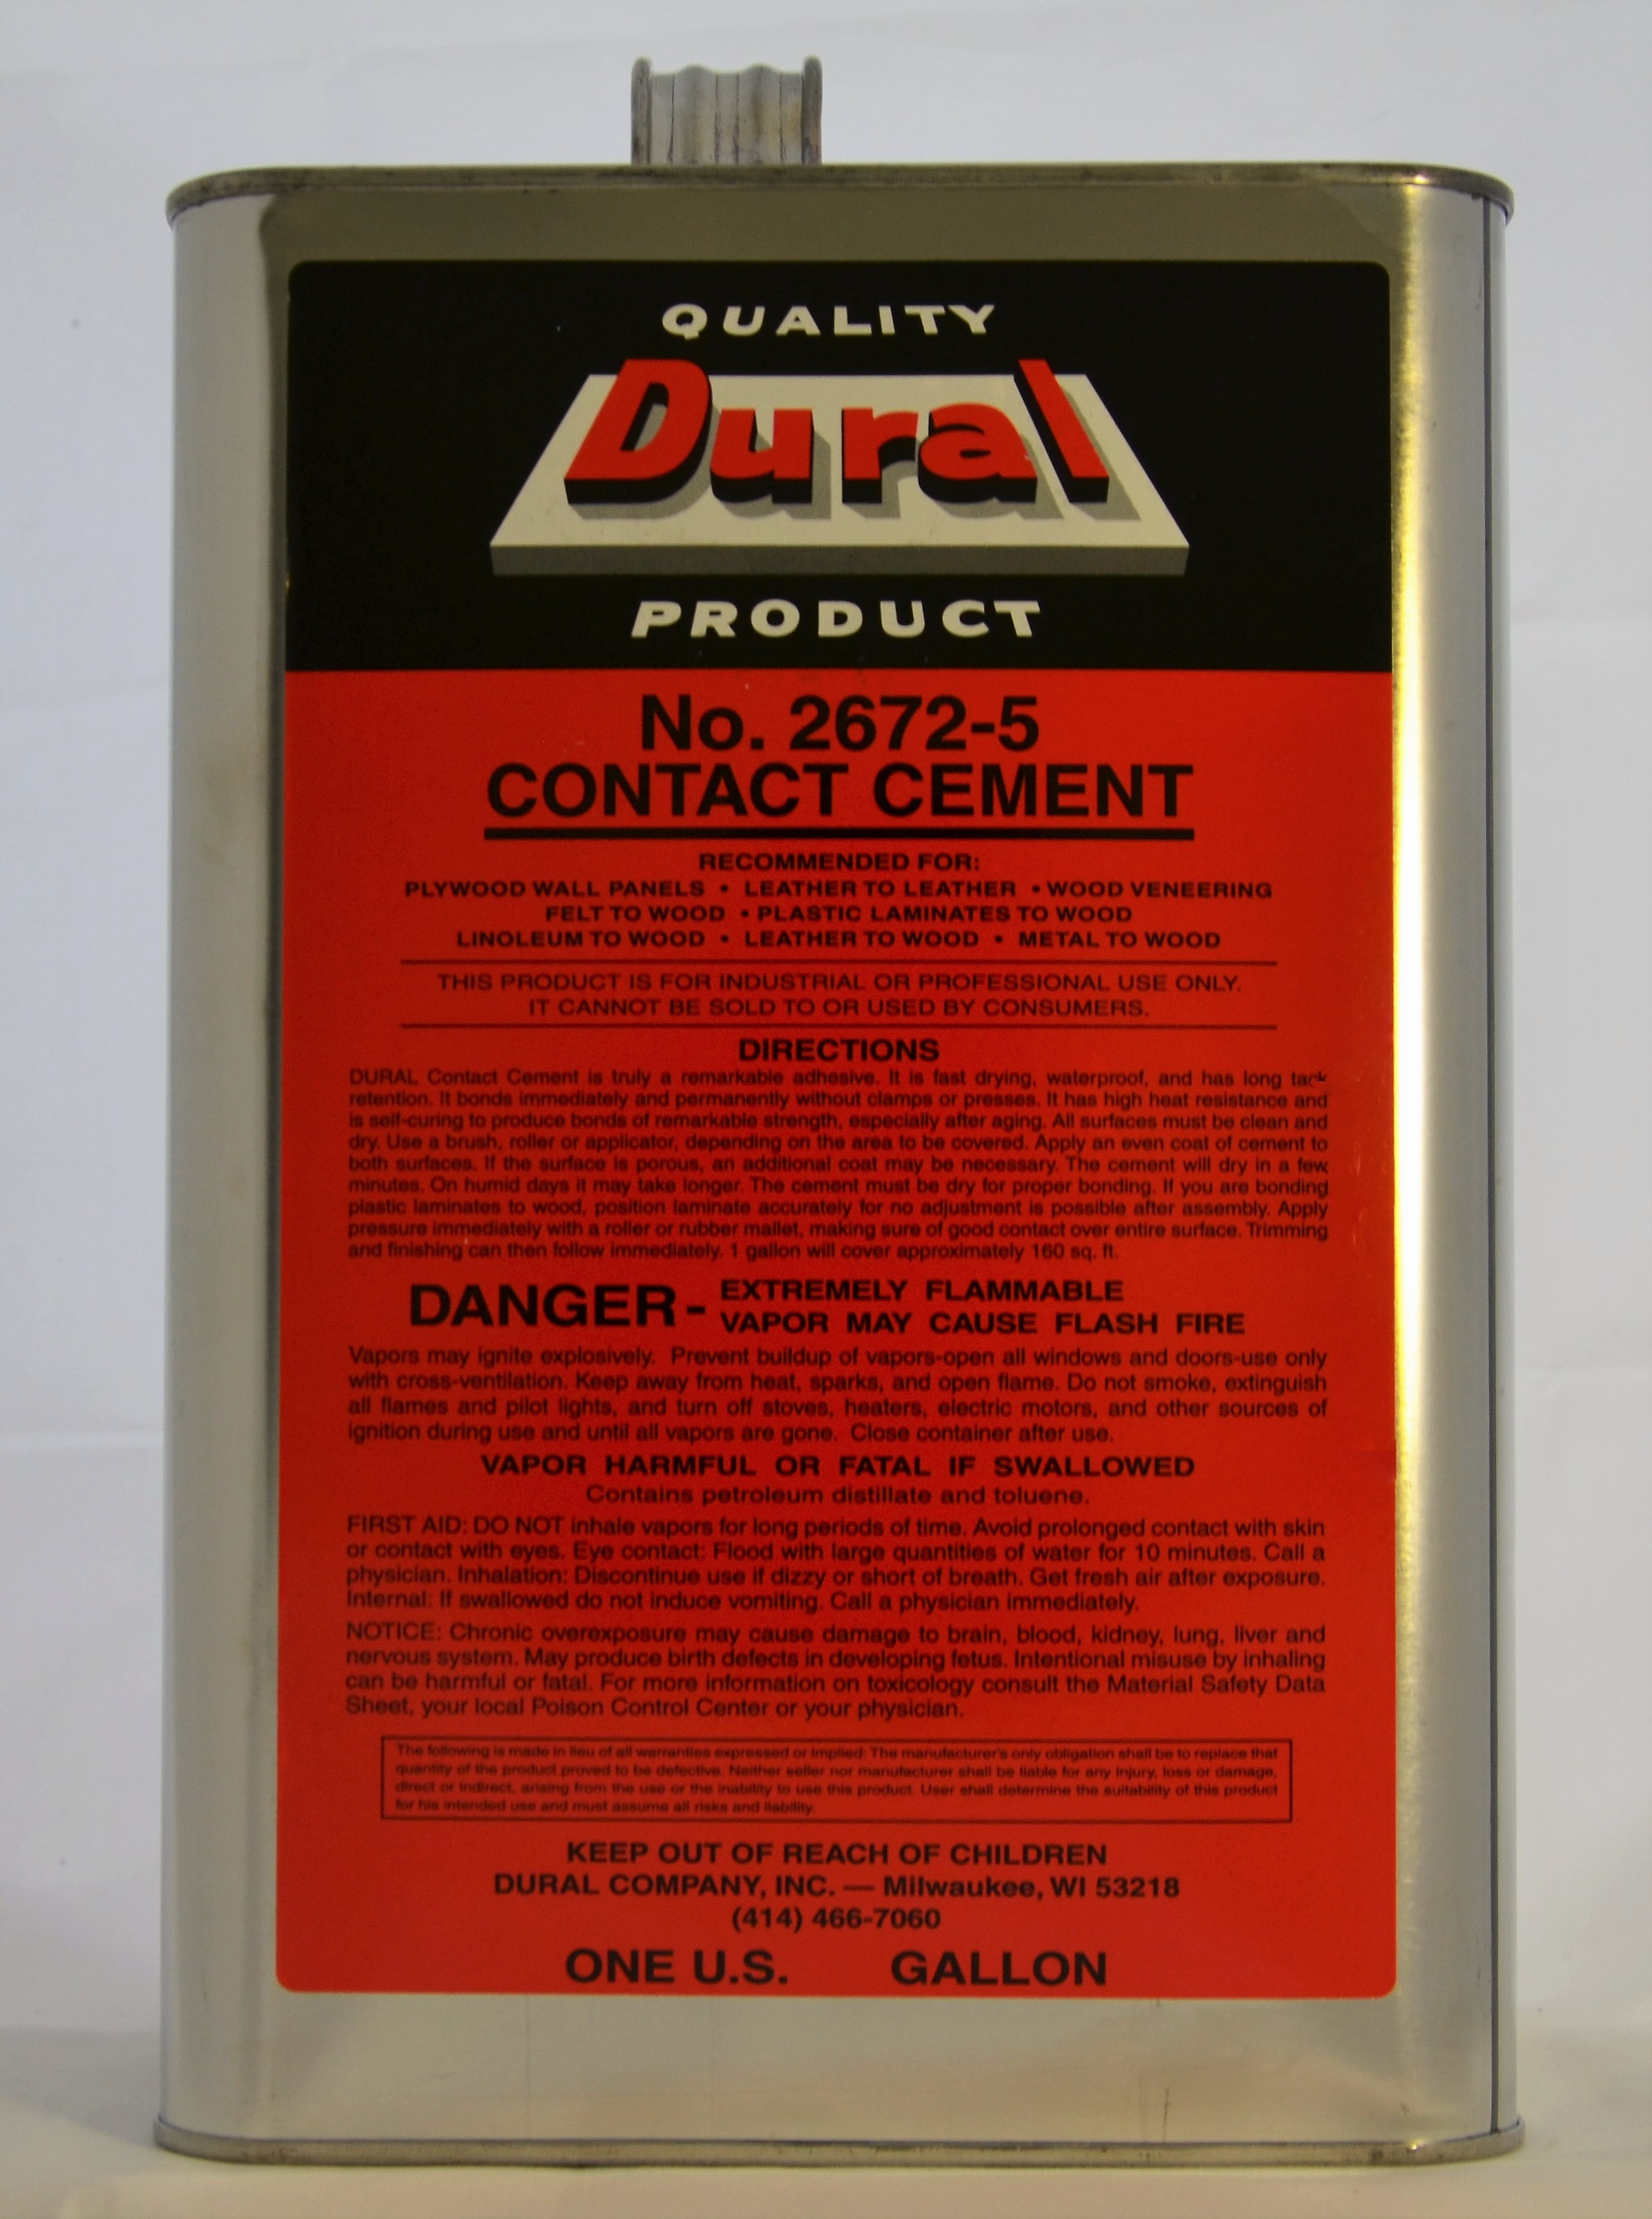 2672-5 Contact Cement